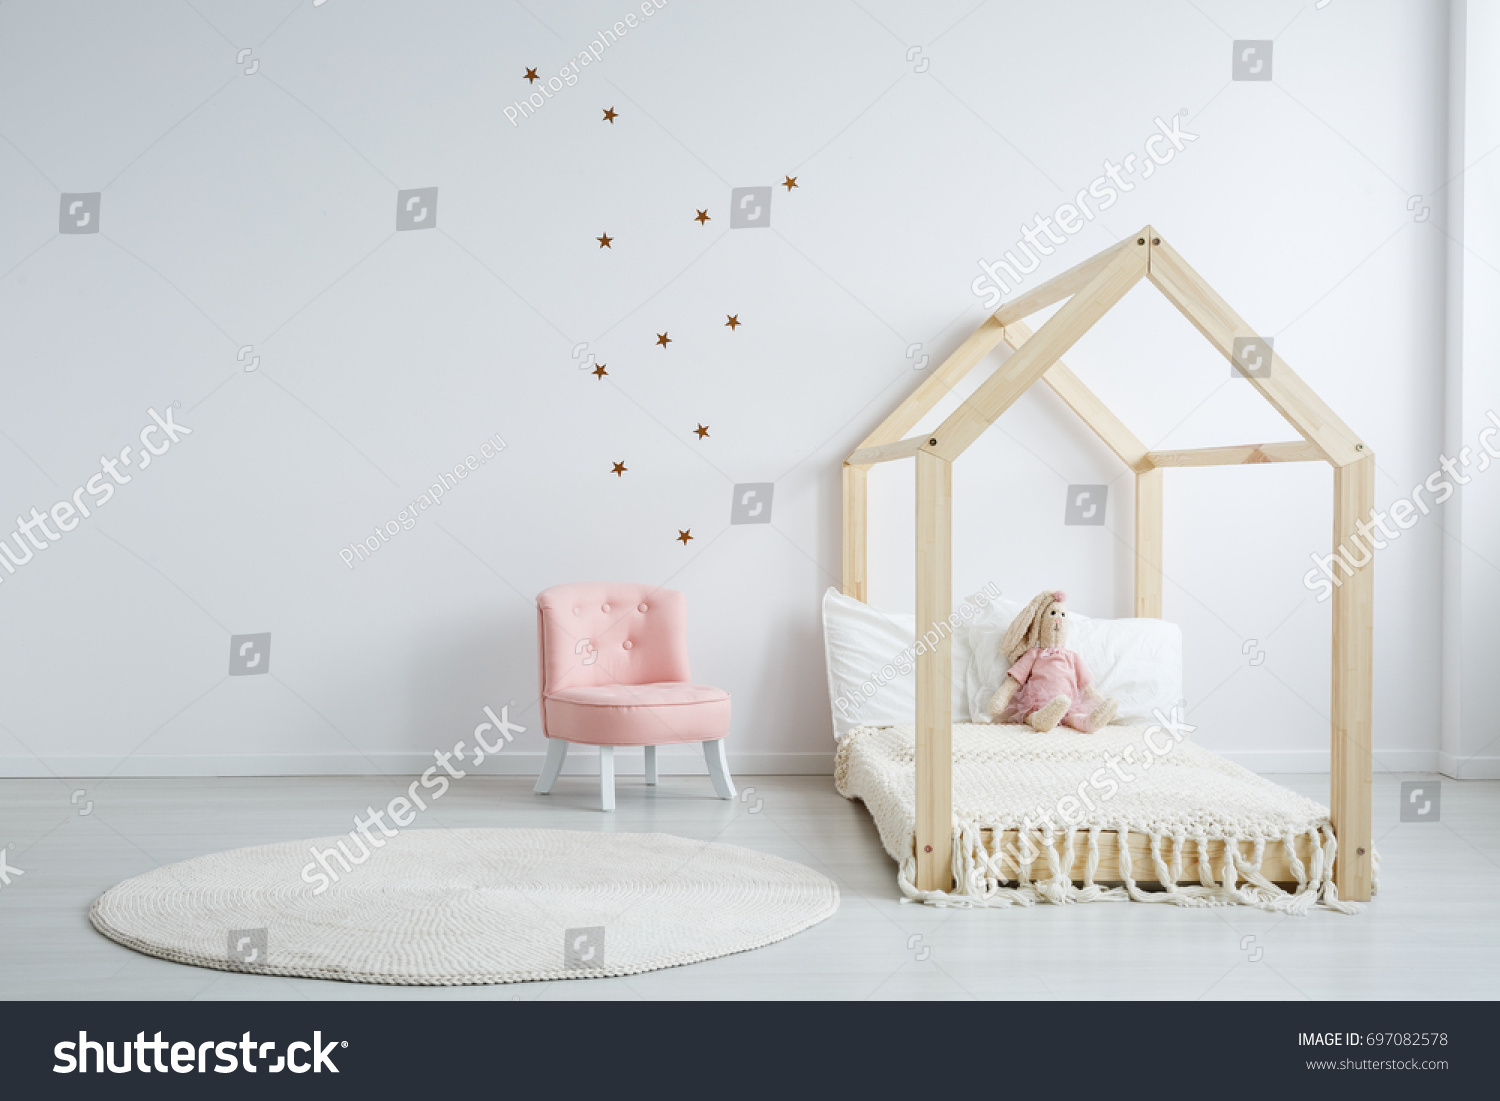 Modern children's furniture in a spacious bedroom with star stickers on the white wall, and a pastel pink comfortable chic chair next to a wooden bed #697082578